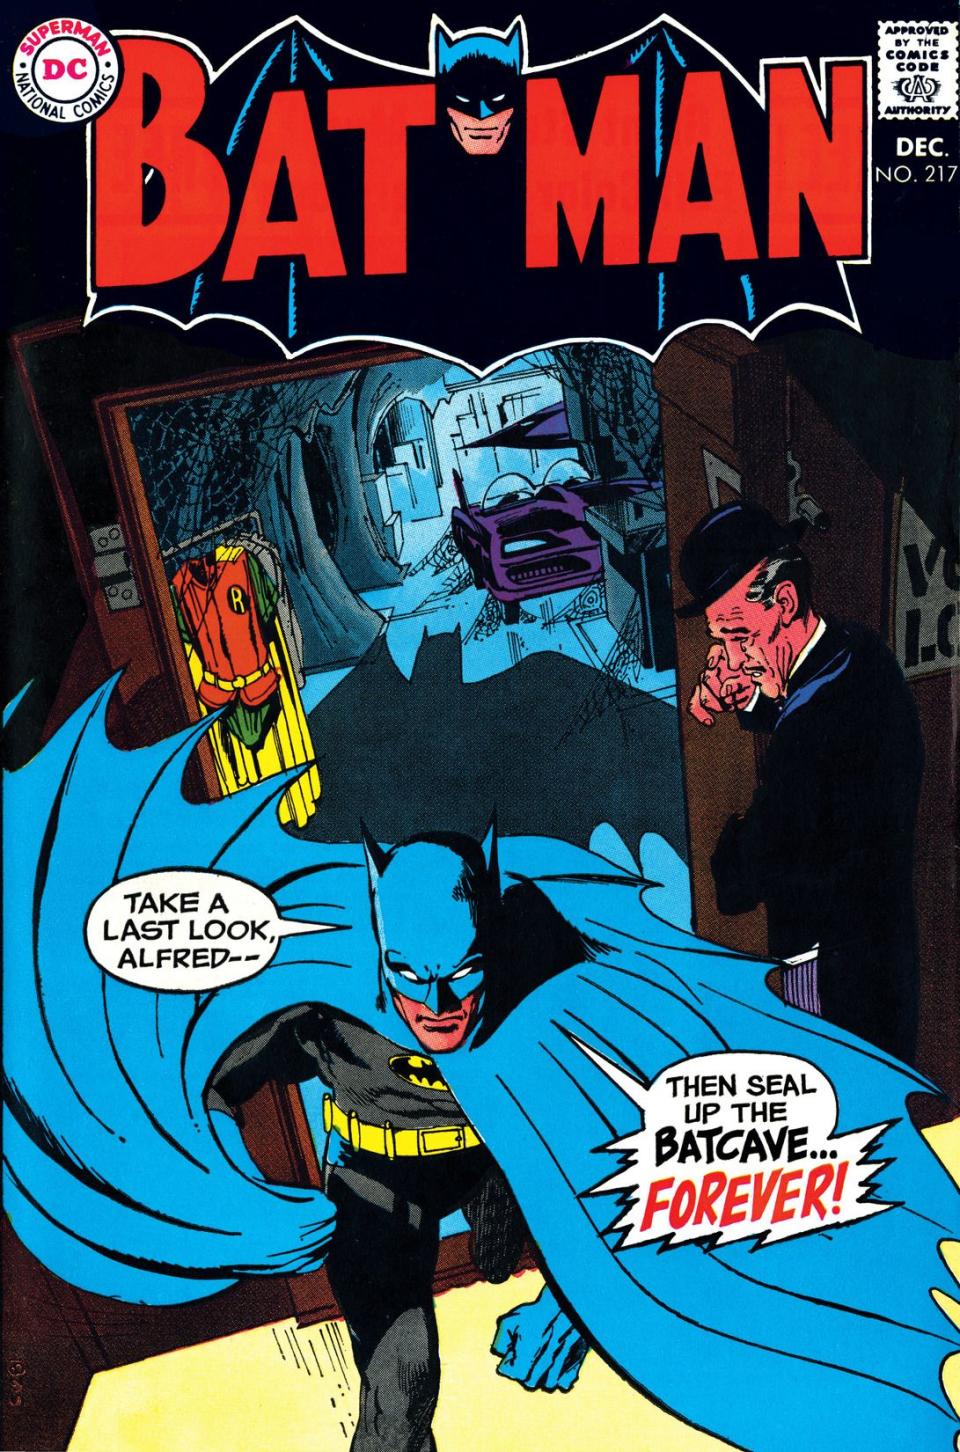 80 BATMAN Covers That Are Hilariously Weird_38